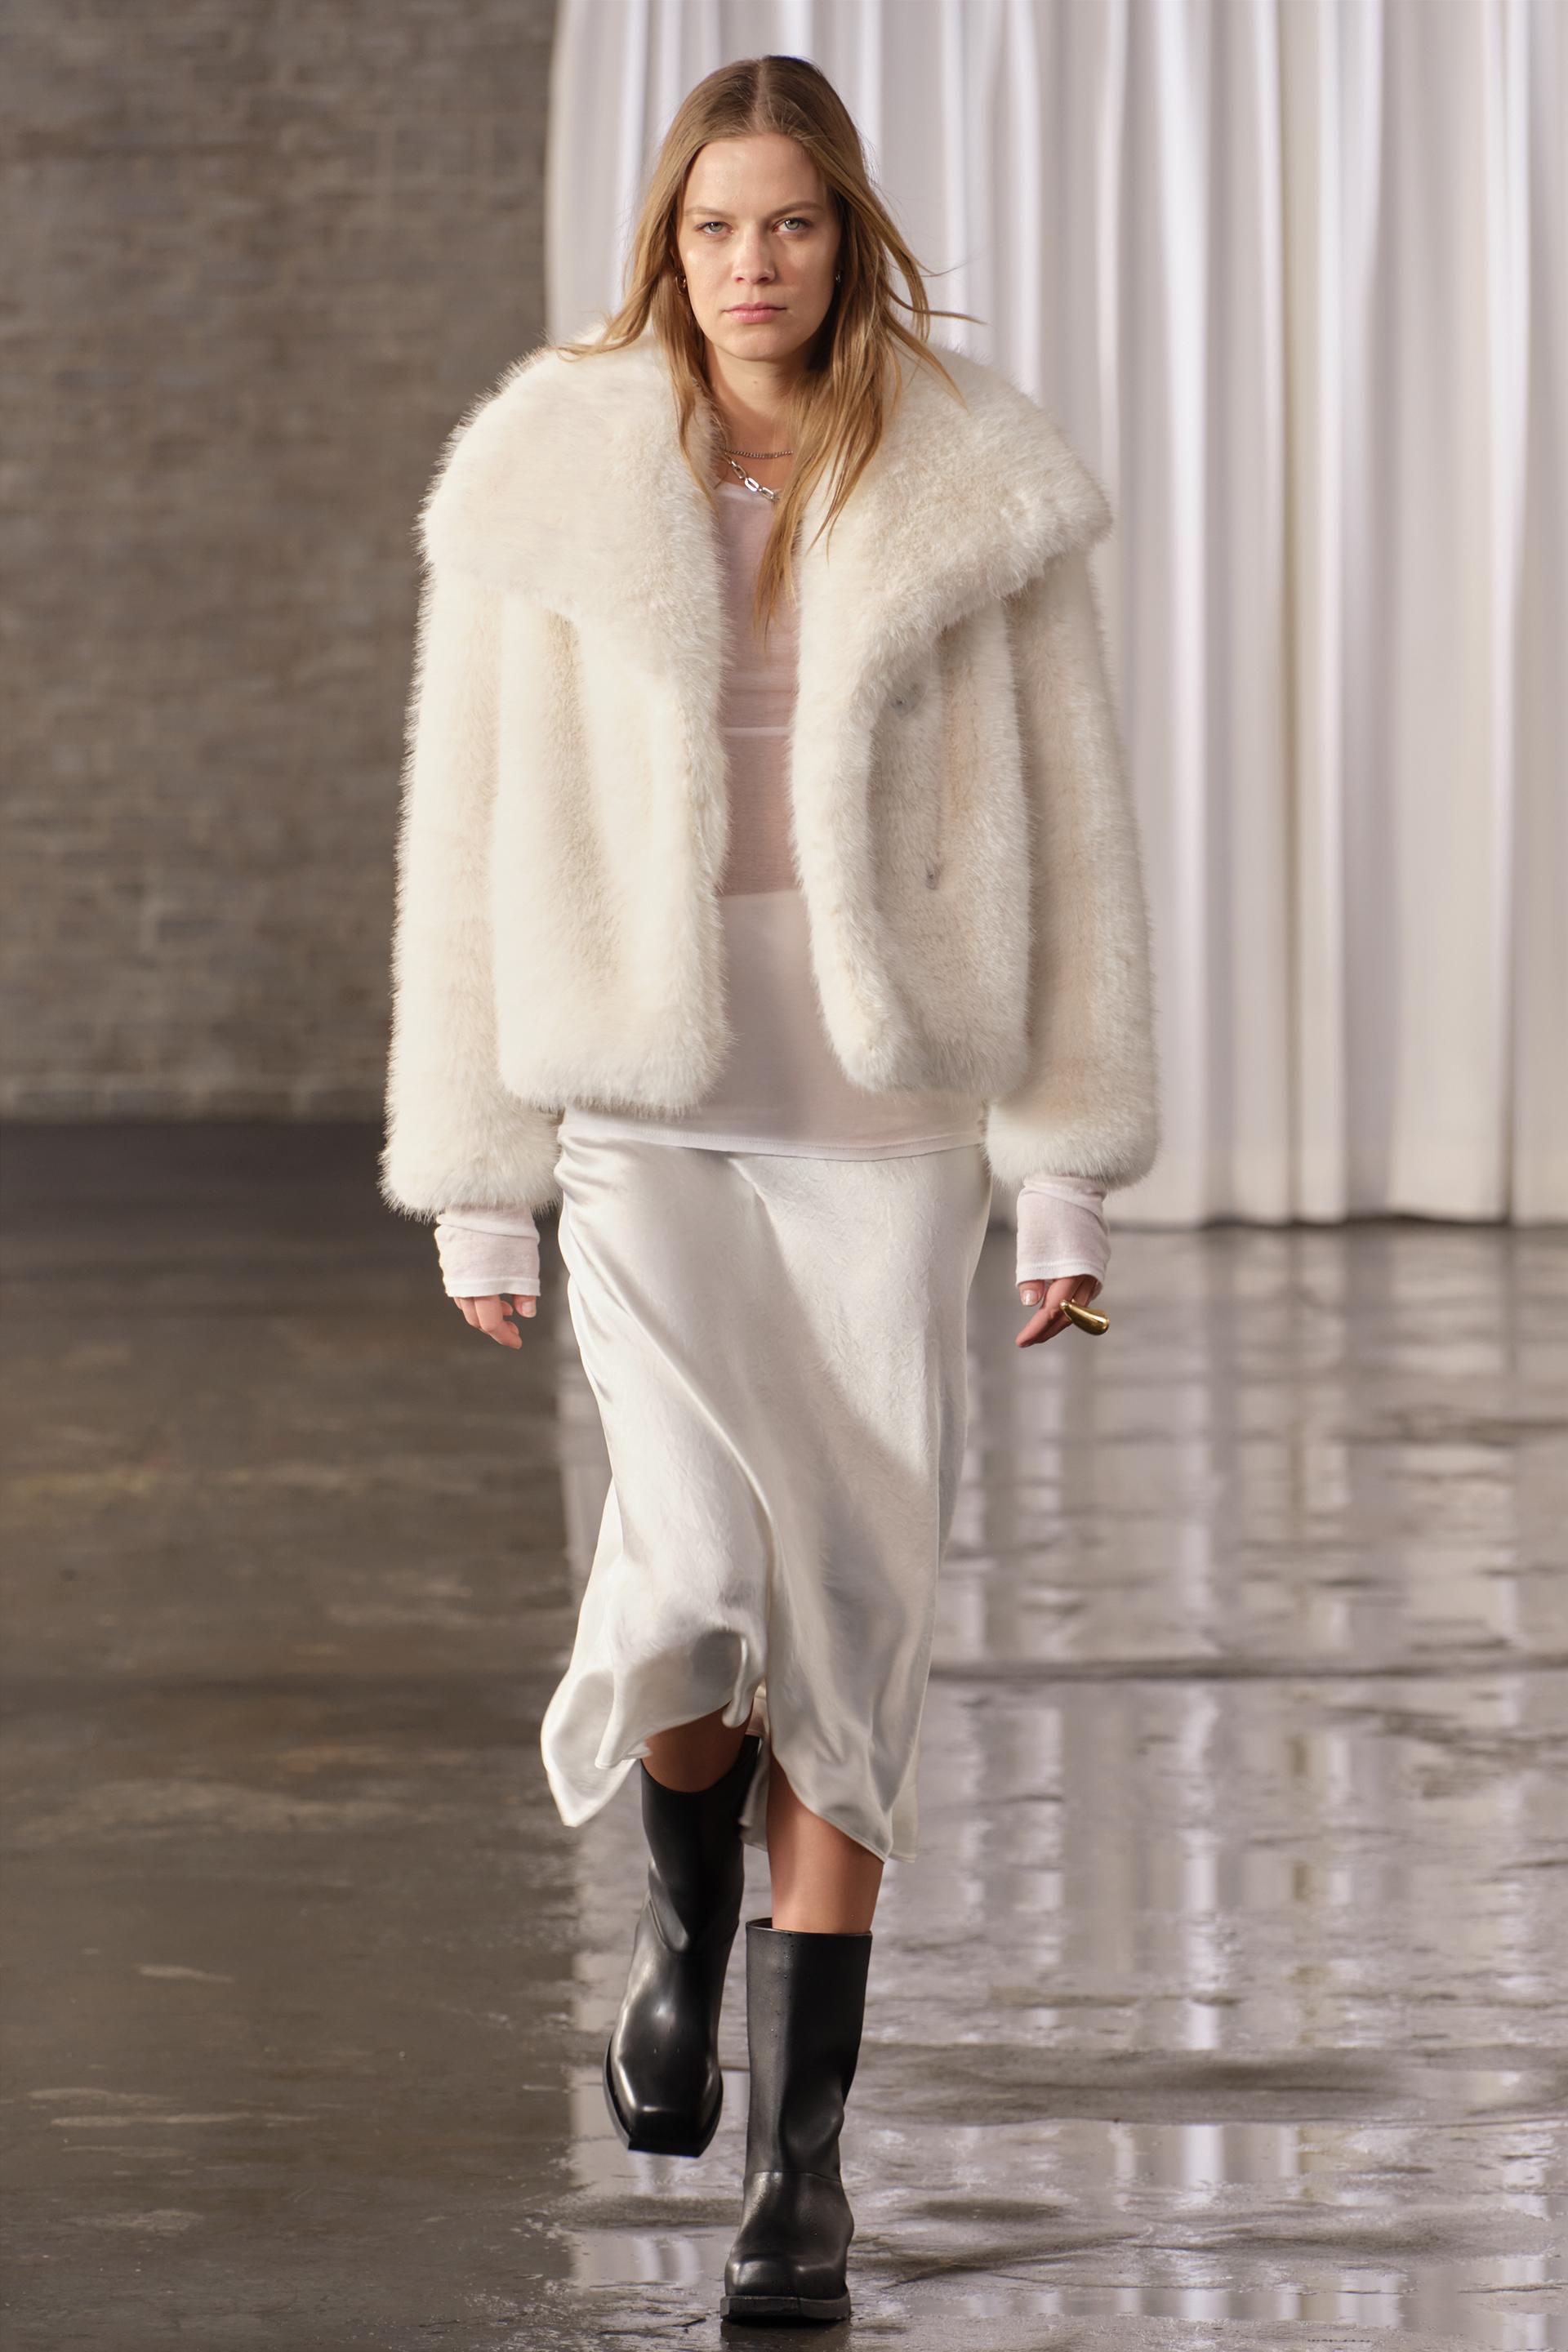 FAUX FUR COLLAR COAT ZW COLLECTION - Stone